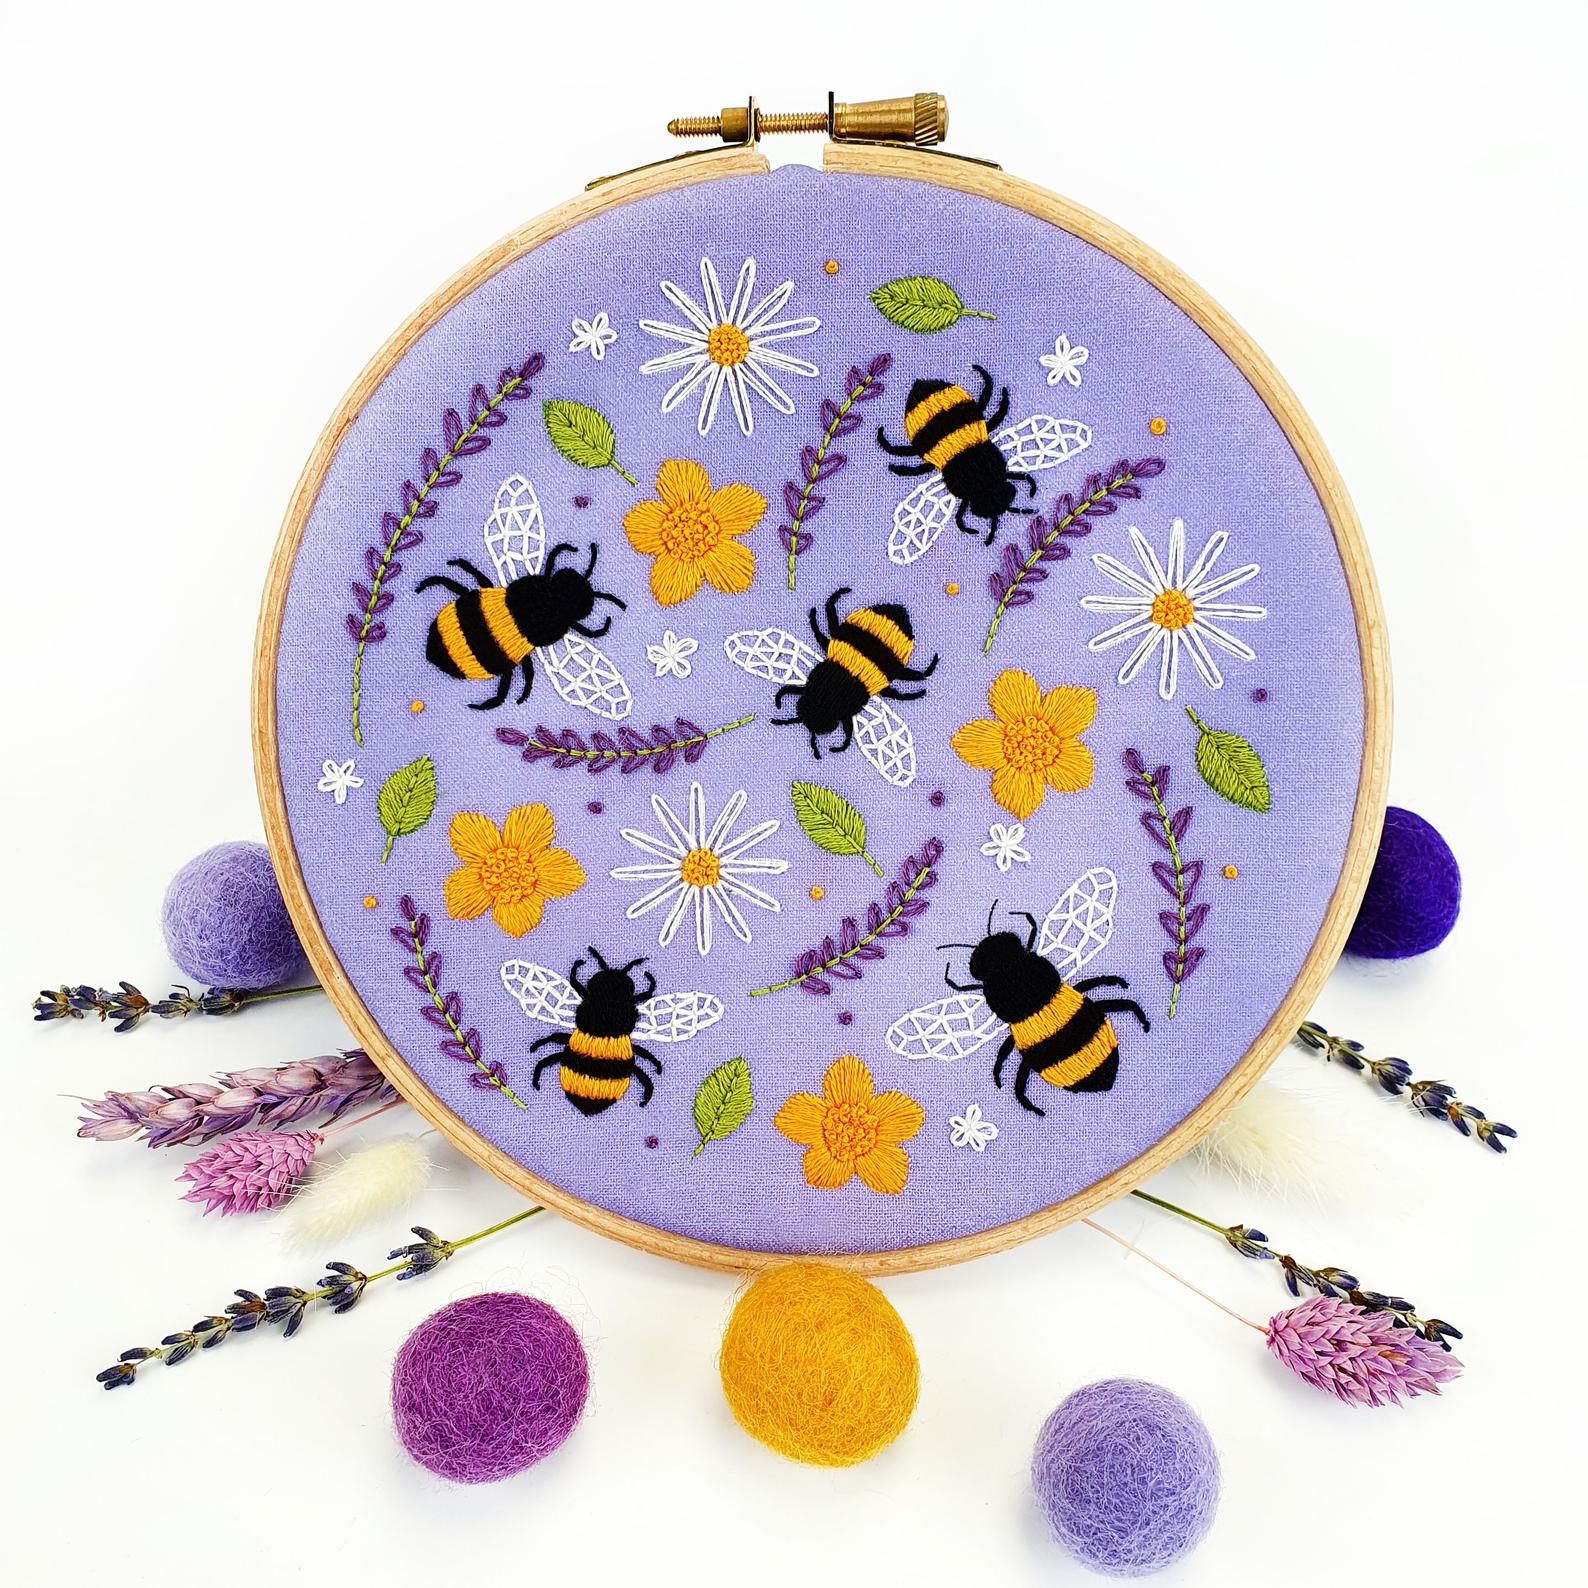 Bees and Lavender Embroidery Fabric Pattern Pack - Fabric Packs - ohsewbootiful